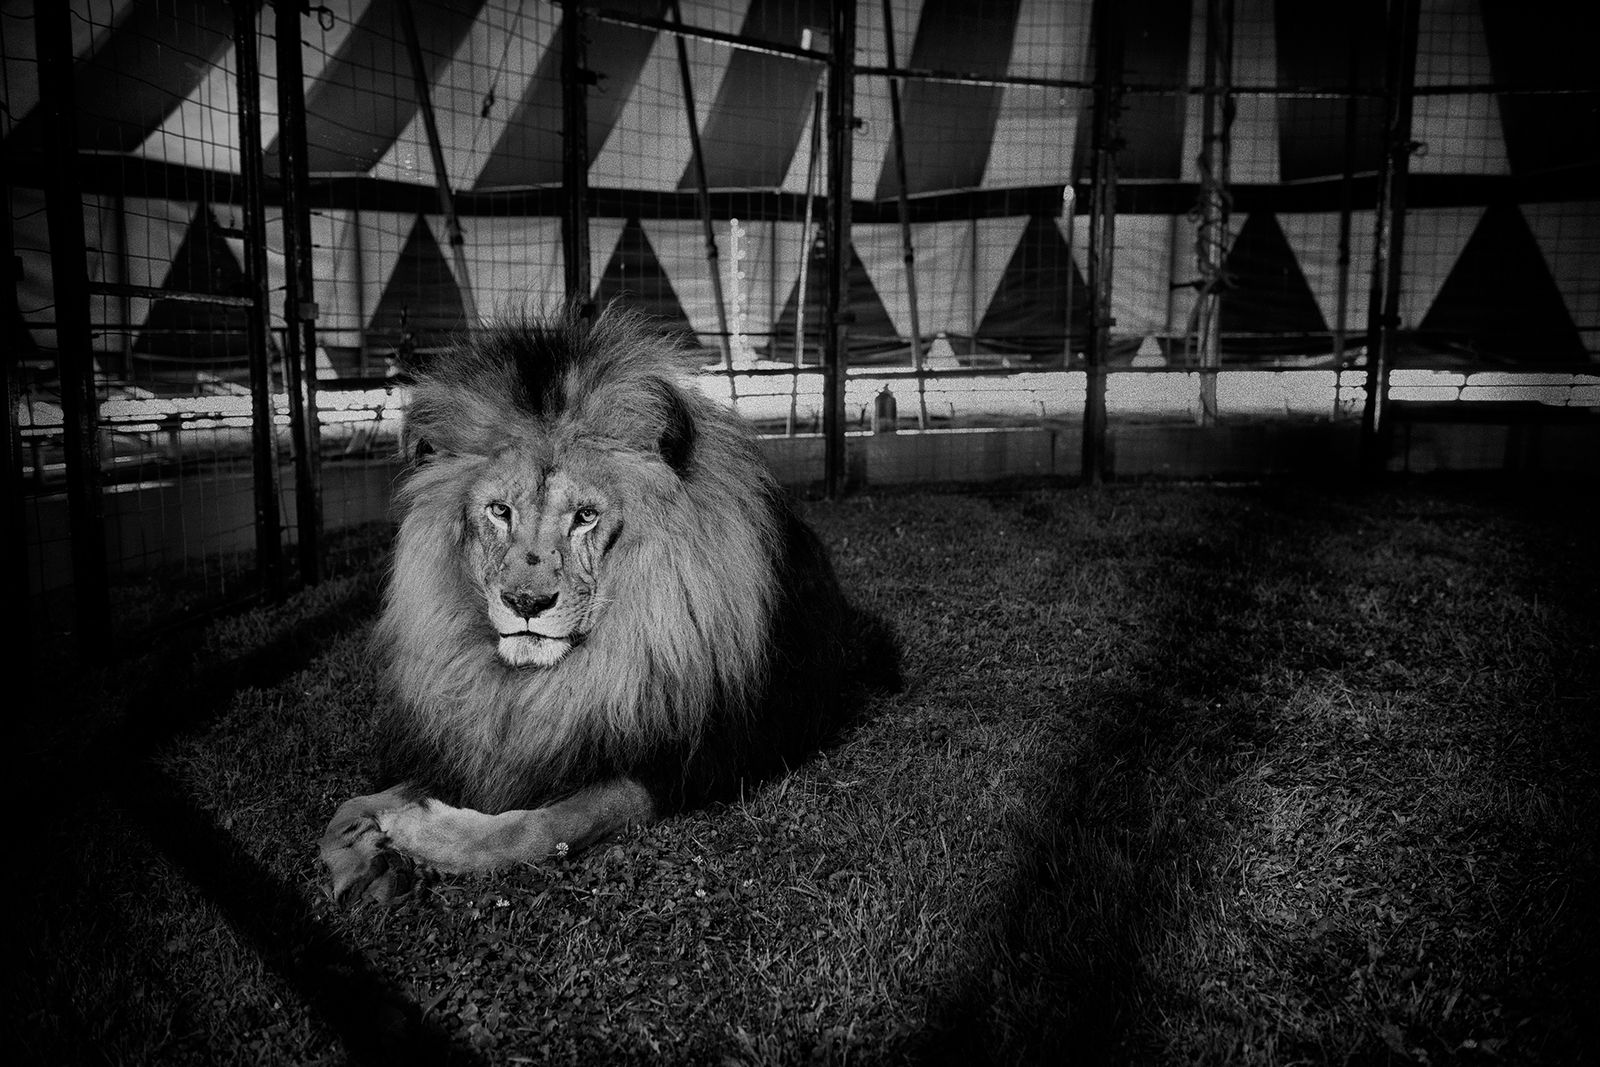 © Lieh Sugai - Francis rests in the arena before the show. The circus has three big cats, all born in captivity.